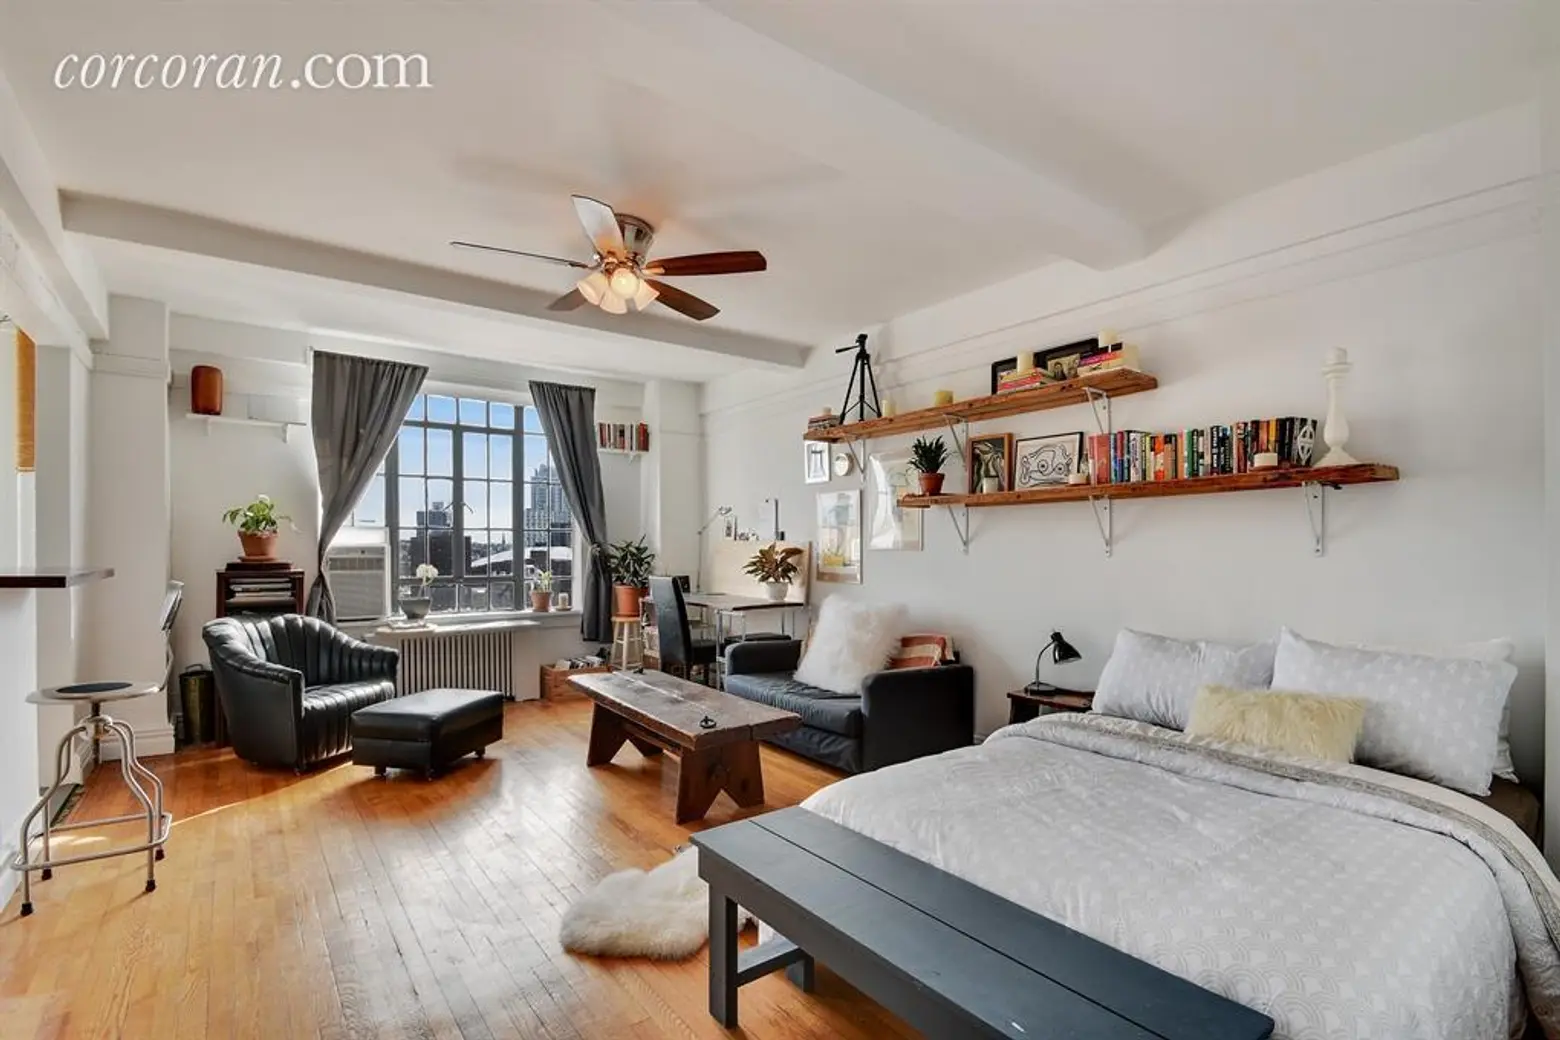 $525K Fort Greene studio has pre-war details and a thoughtful layout